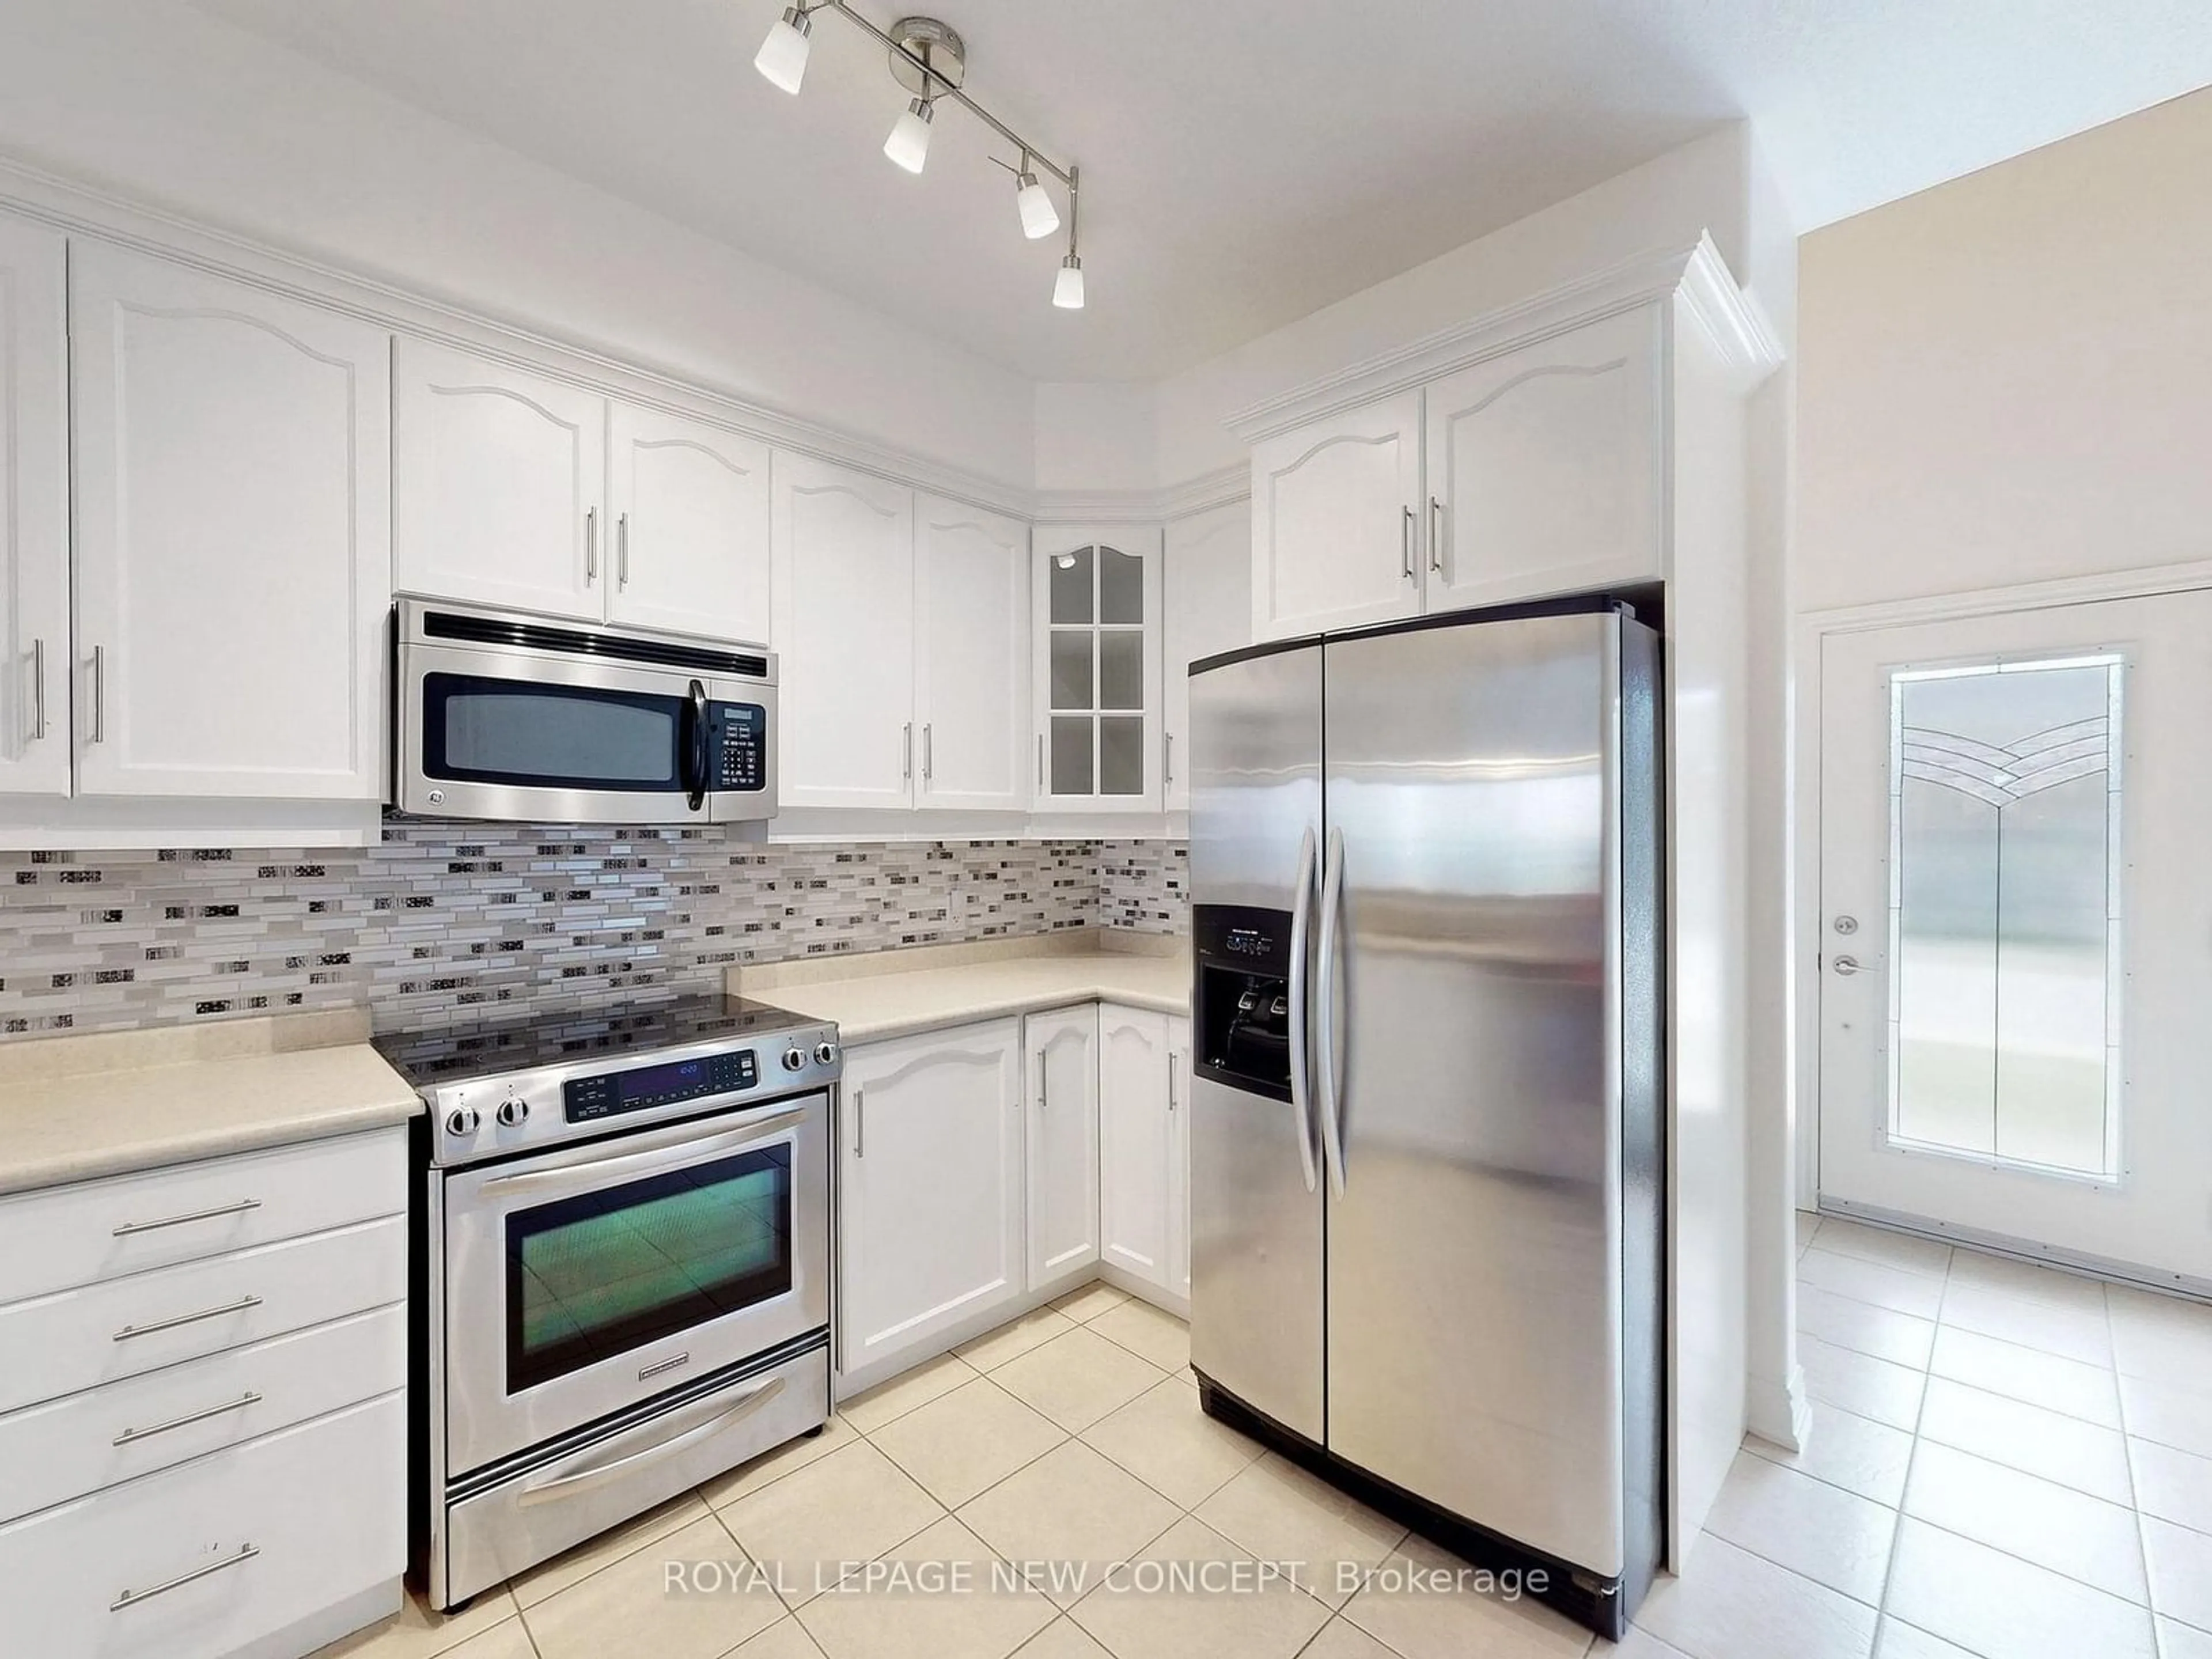 Standard kitchen for 125 Huronia Rd #11, Barrie Ontario L4N 4G1